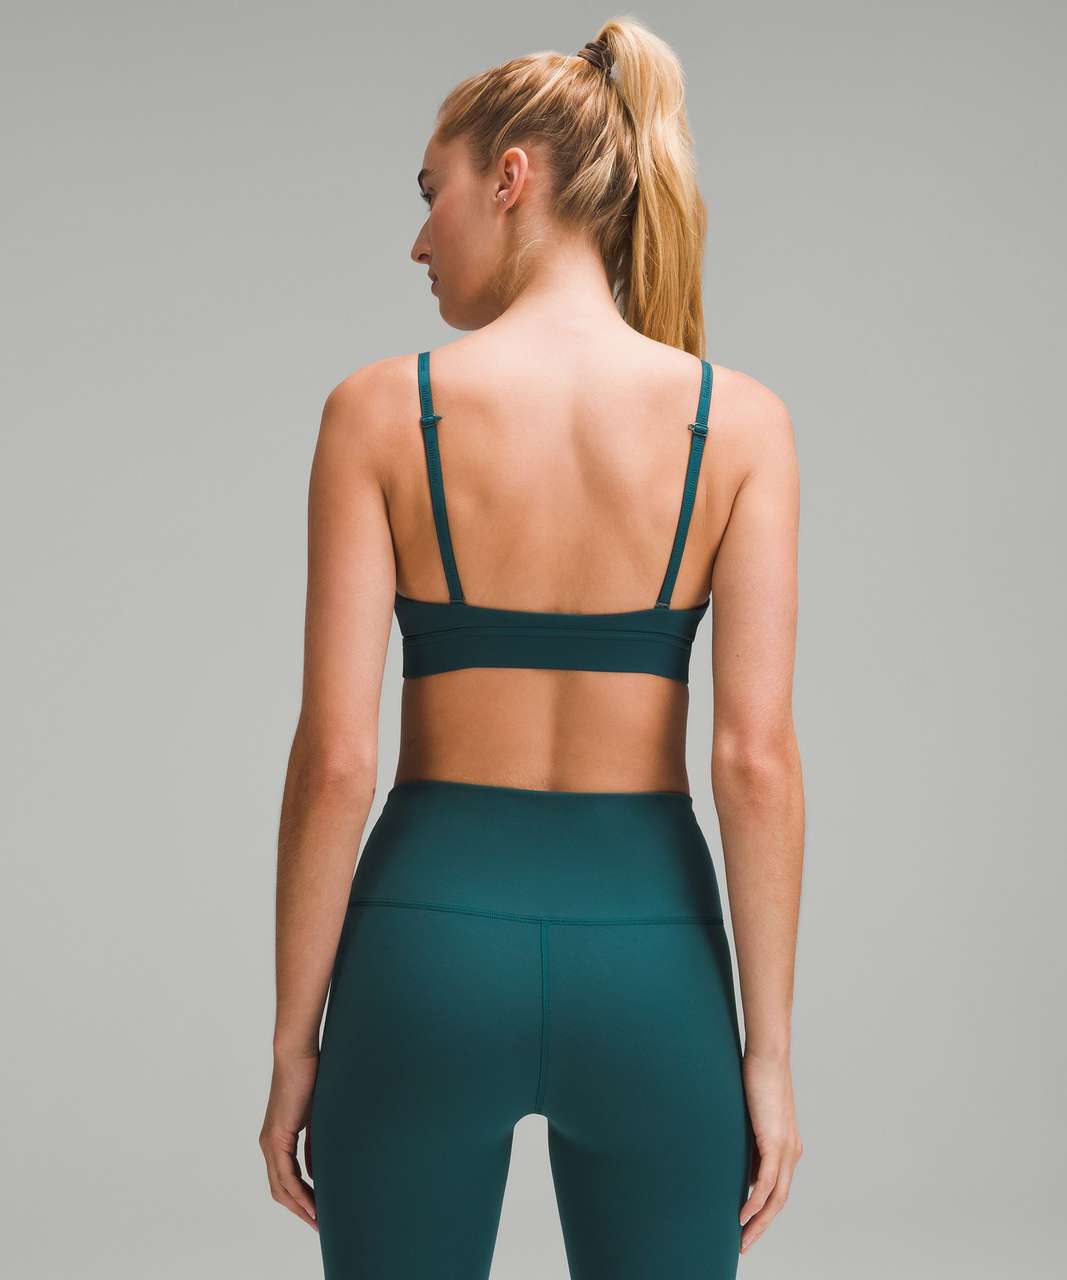 Lululemon License to Train Triangle Bra Light Support, A/B Cup *Logo - Storm Teal